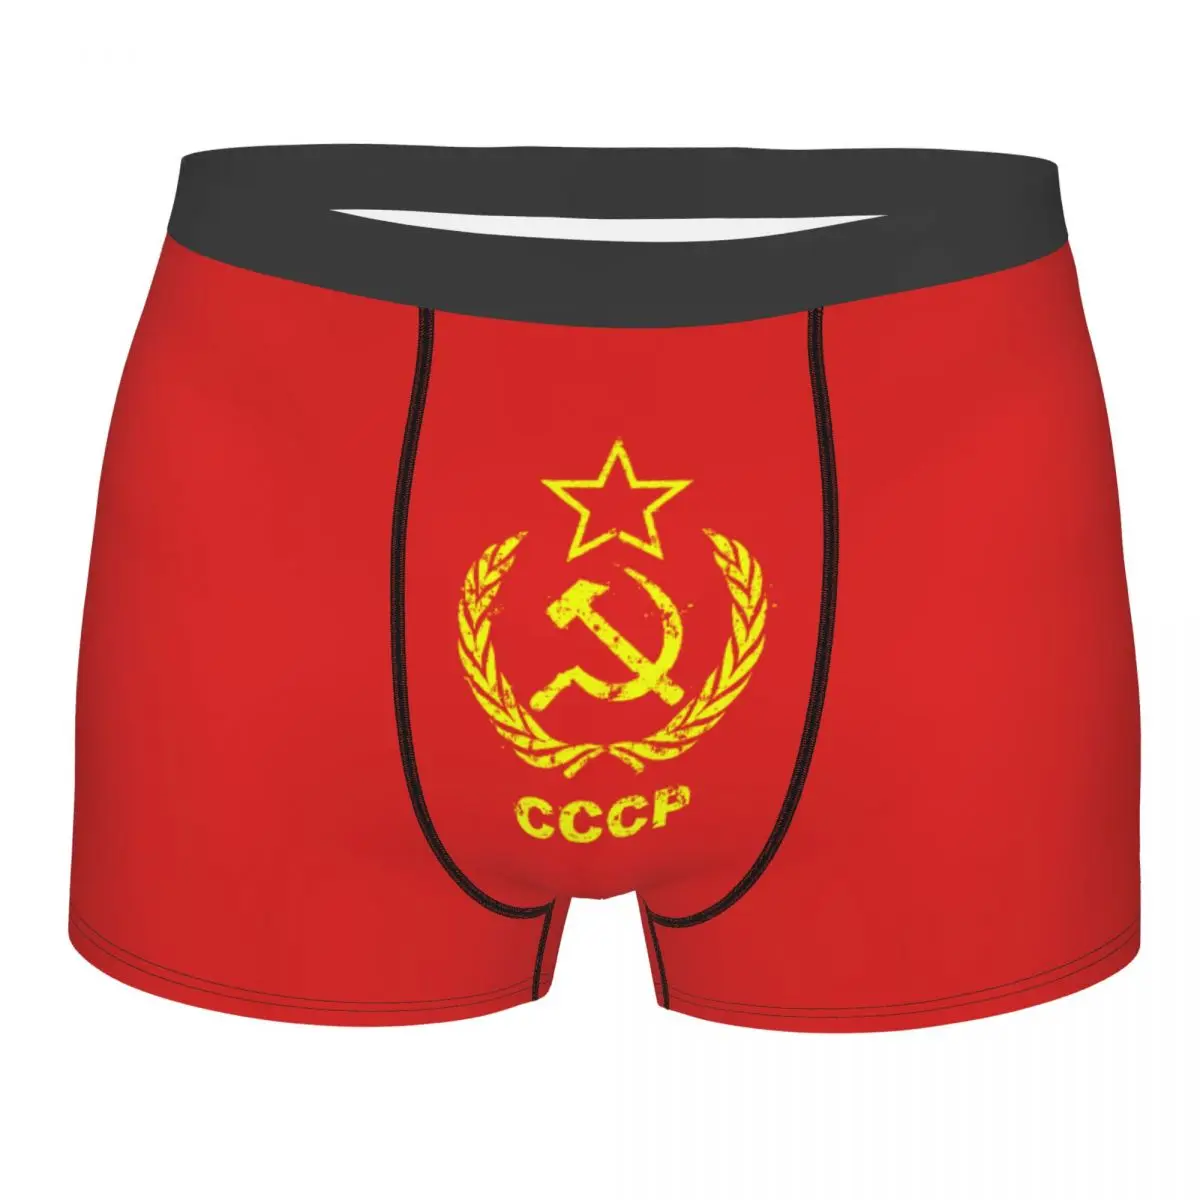 

CCCP USSR Russia National Day Men's Underwear Boxer Shorts Panties Humor Soft Underpants for Male Plus Size